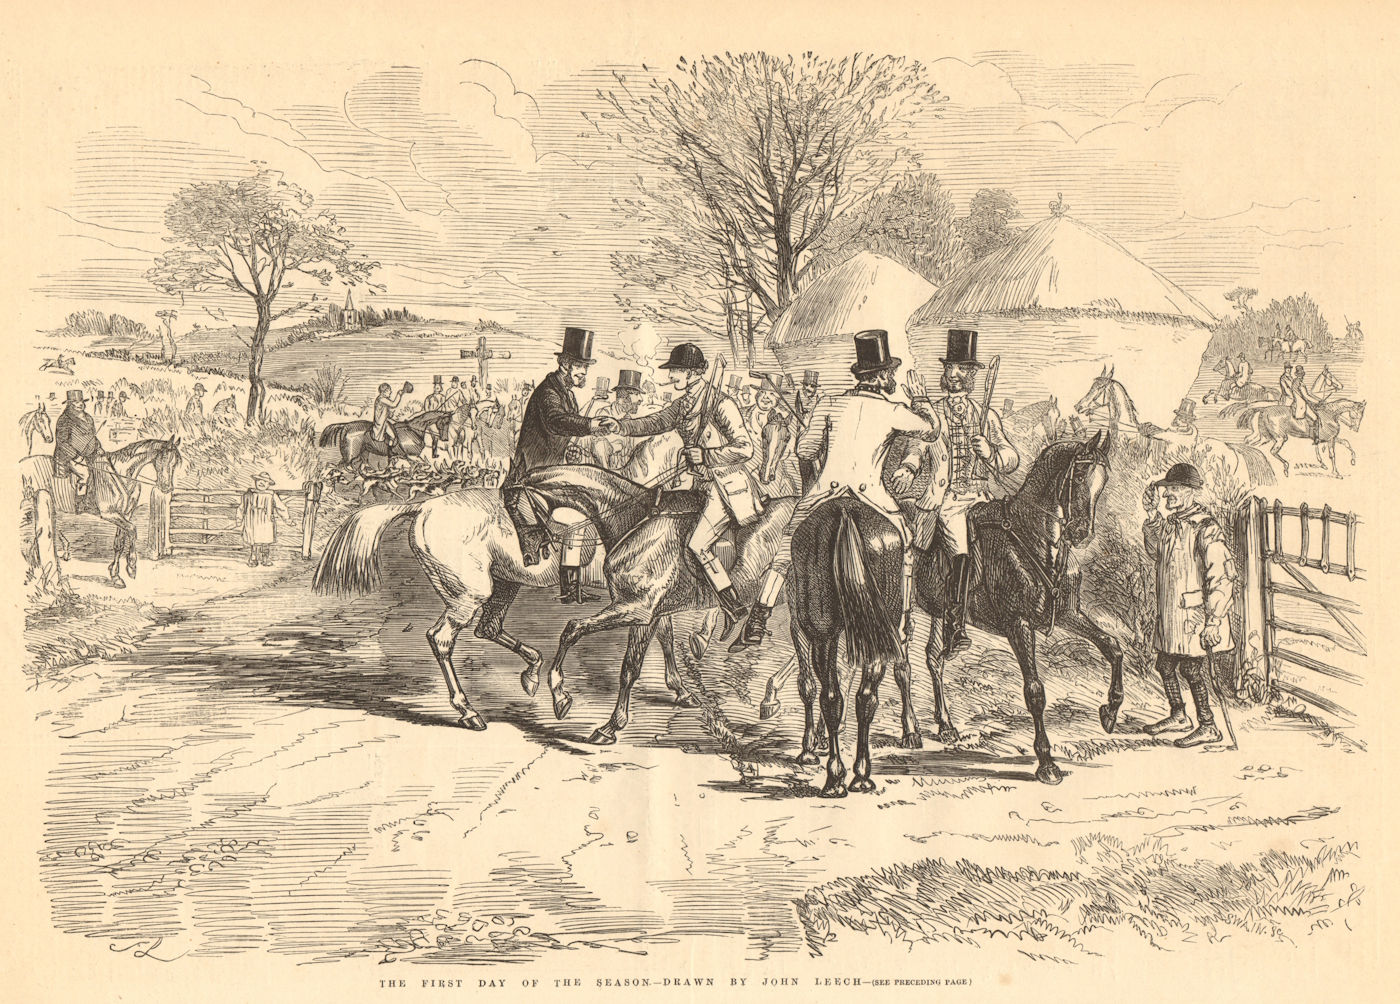 Associate Product The first day of the season - drawn by John Leech. Hunting. Hunting 1856